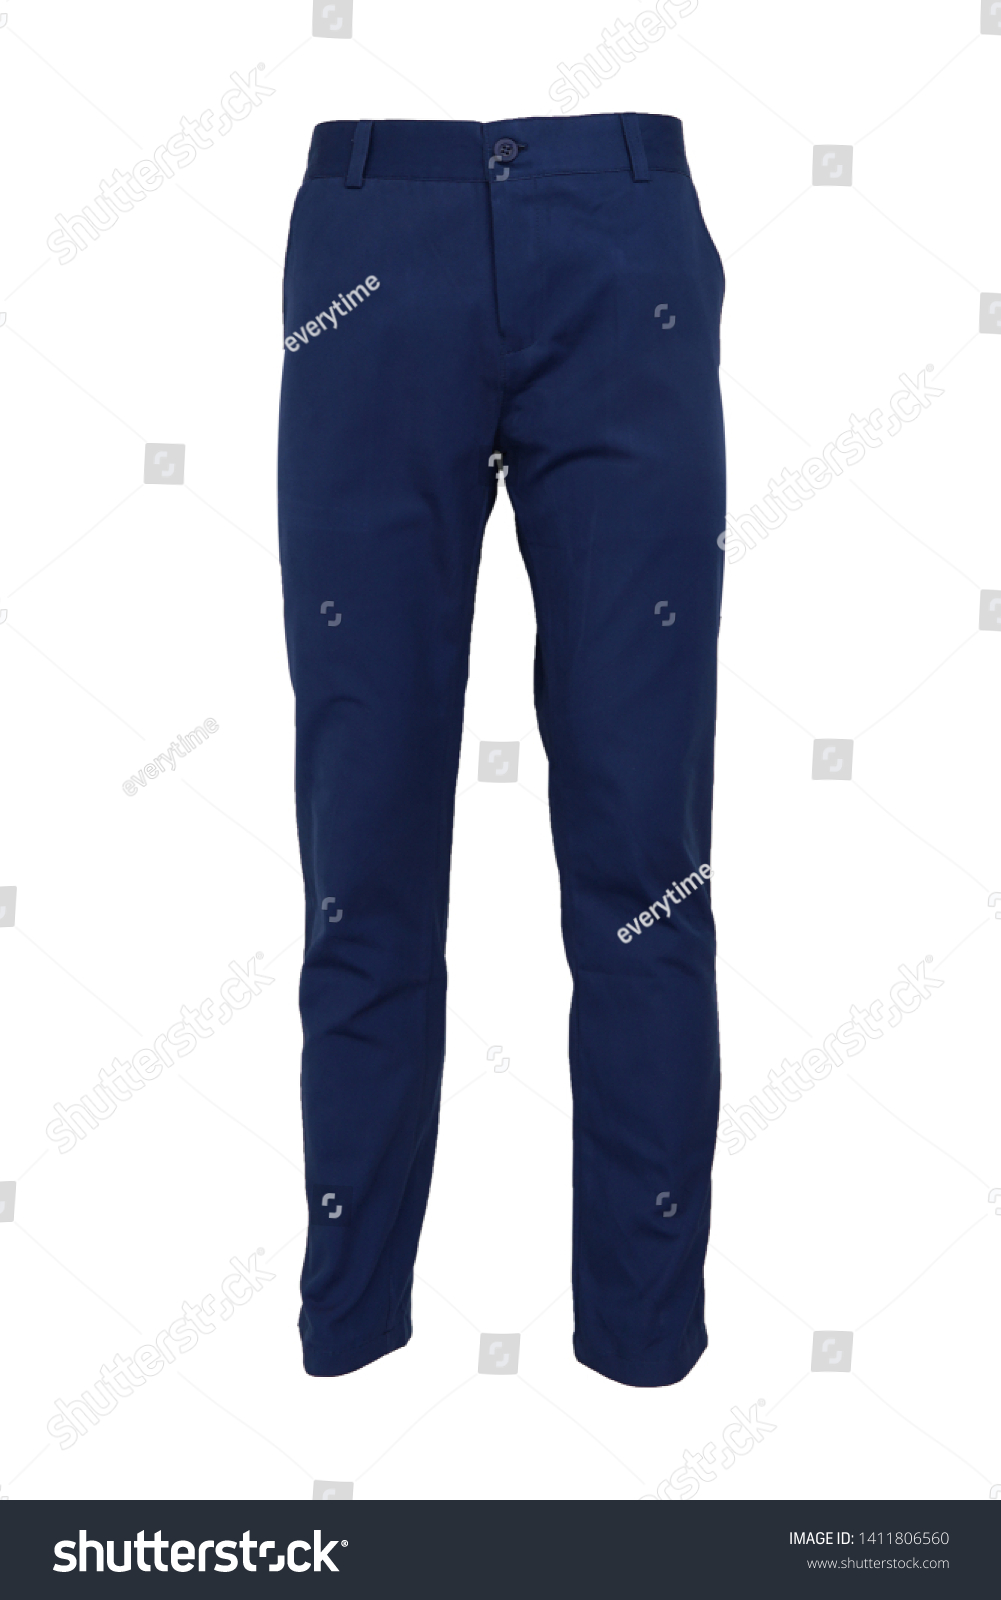 13,199 Navy blue pants Stock Photos, Images & Photography | Shutterstock